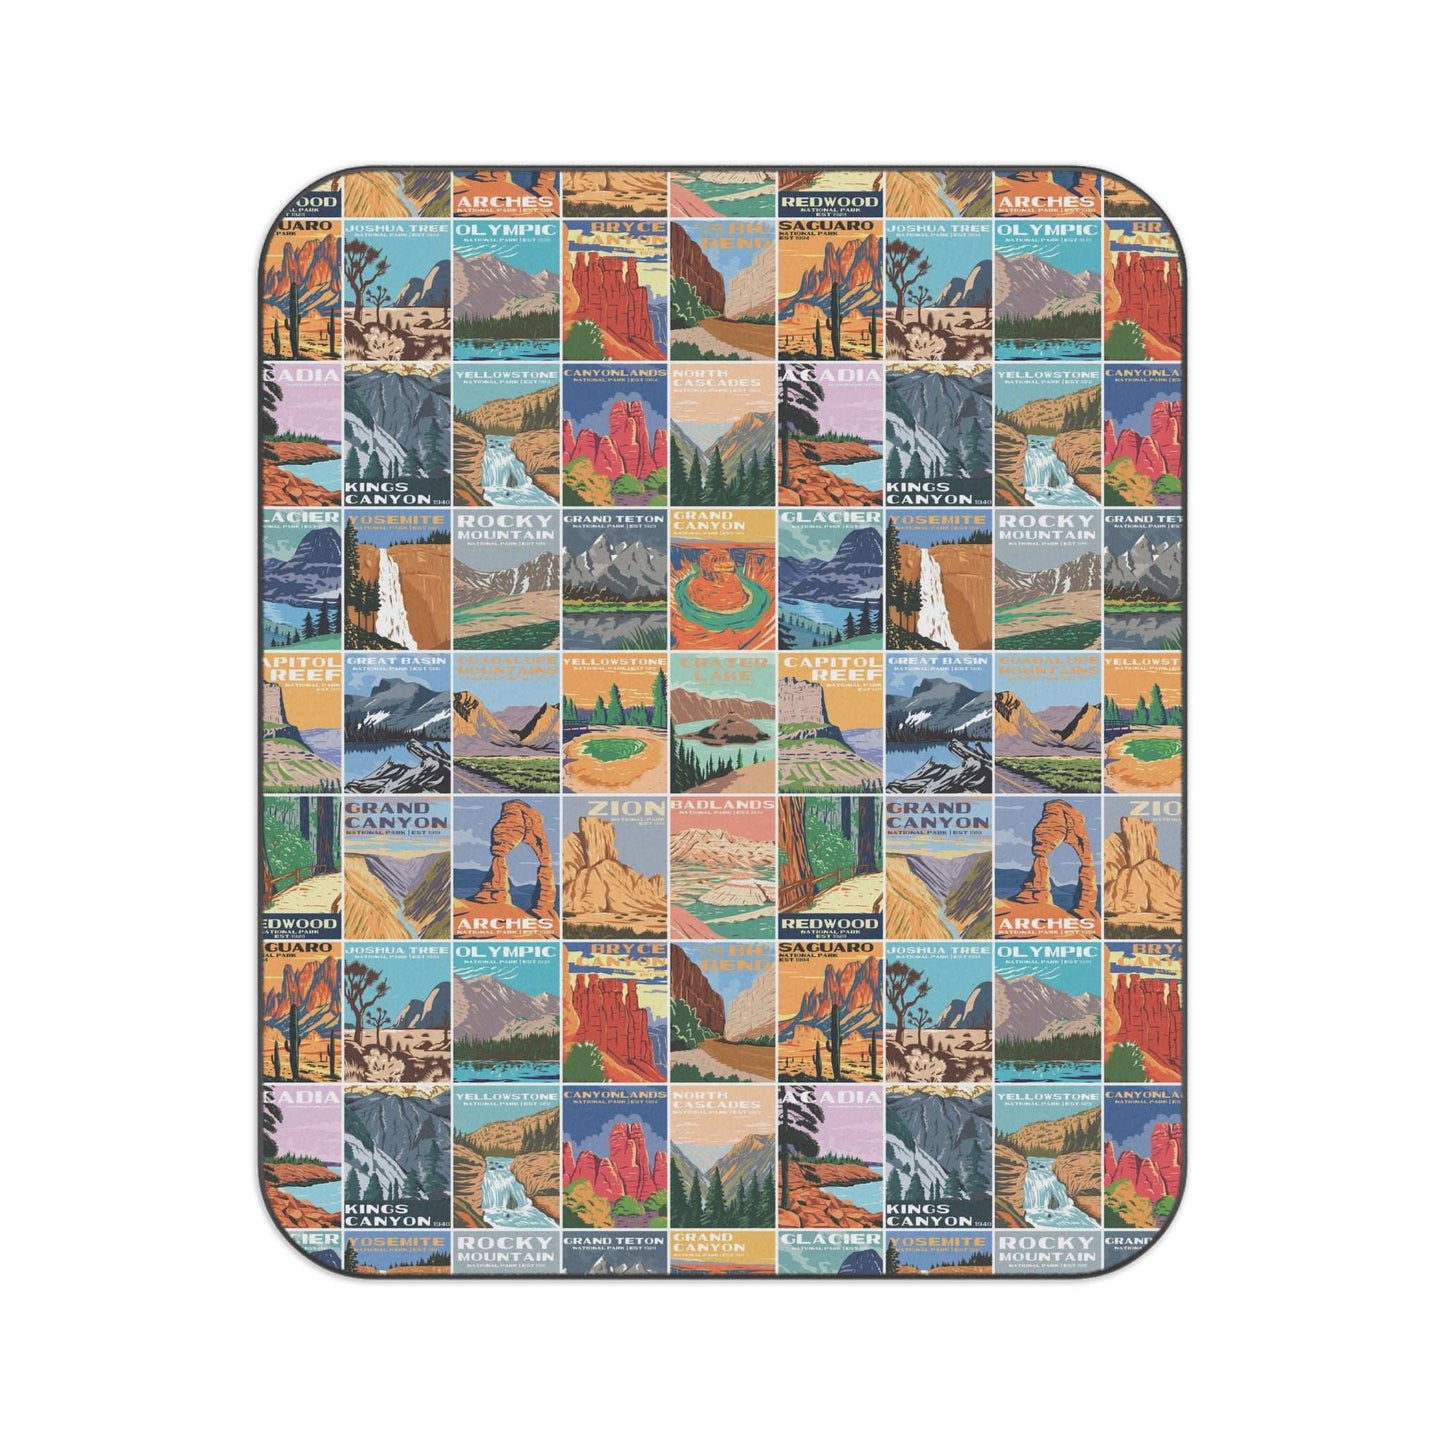 National Parks Microfiber Picnic BlanketStay dry and comfy on all your National Park adventures with this vintage styled National Park posters picnic blanket. Inspired by vintage advertisements, this picni